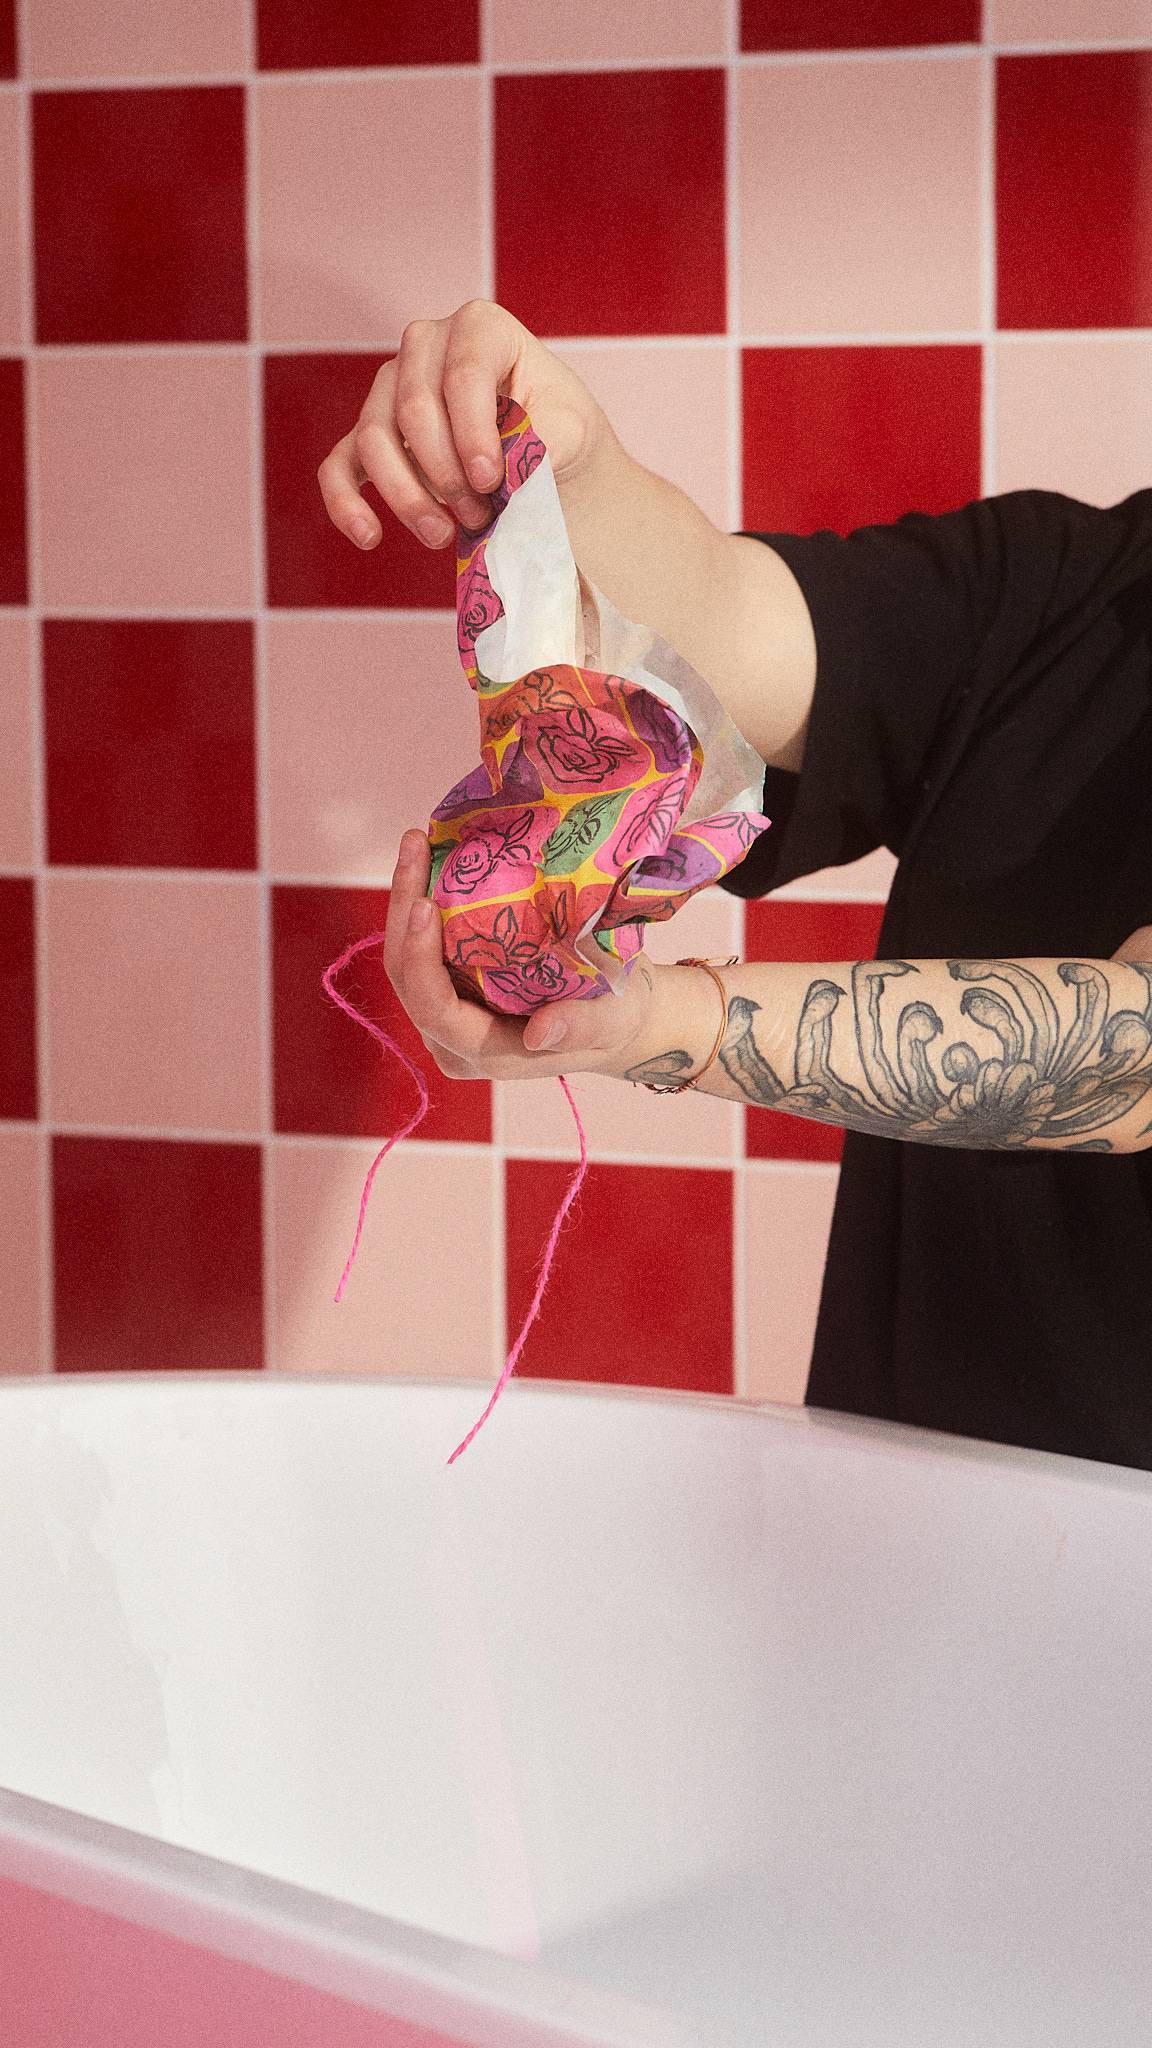 The image shows the model unwrapping the Abstract Roses gift wrap from a Lush bath bomb on a tiled background.